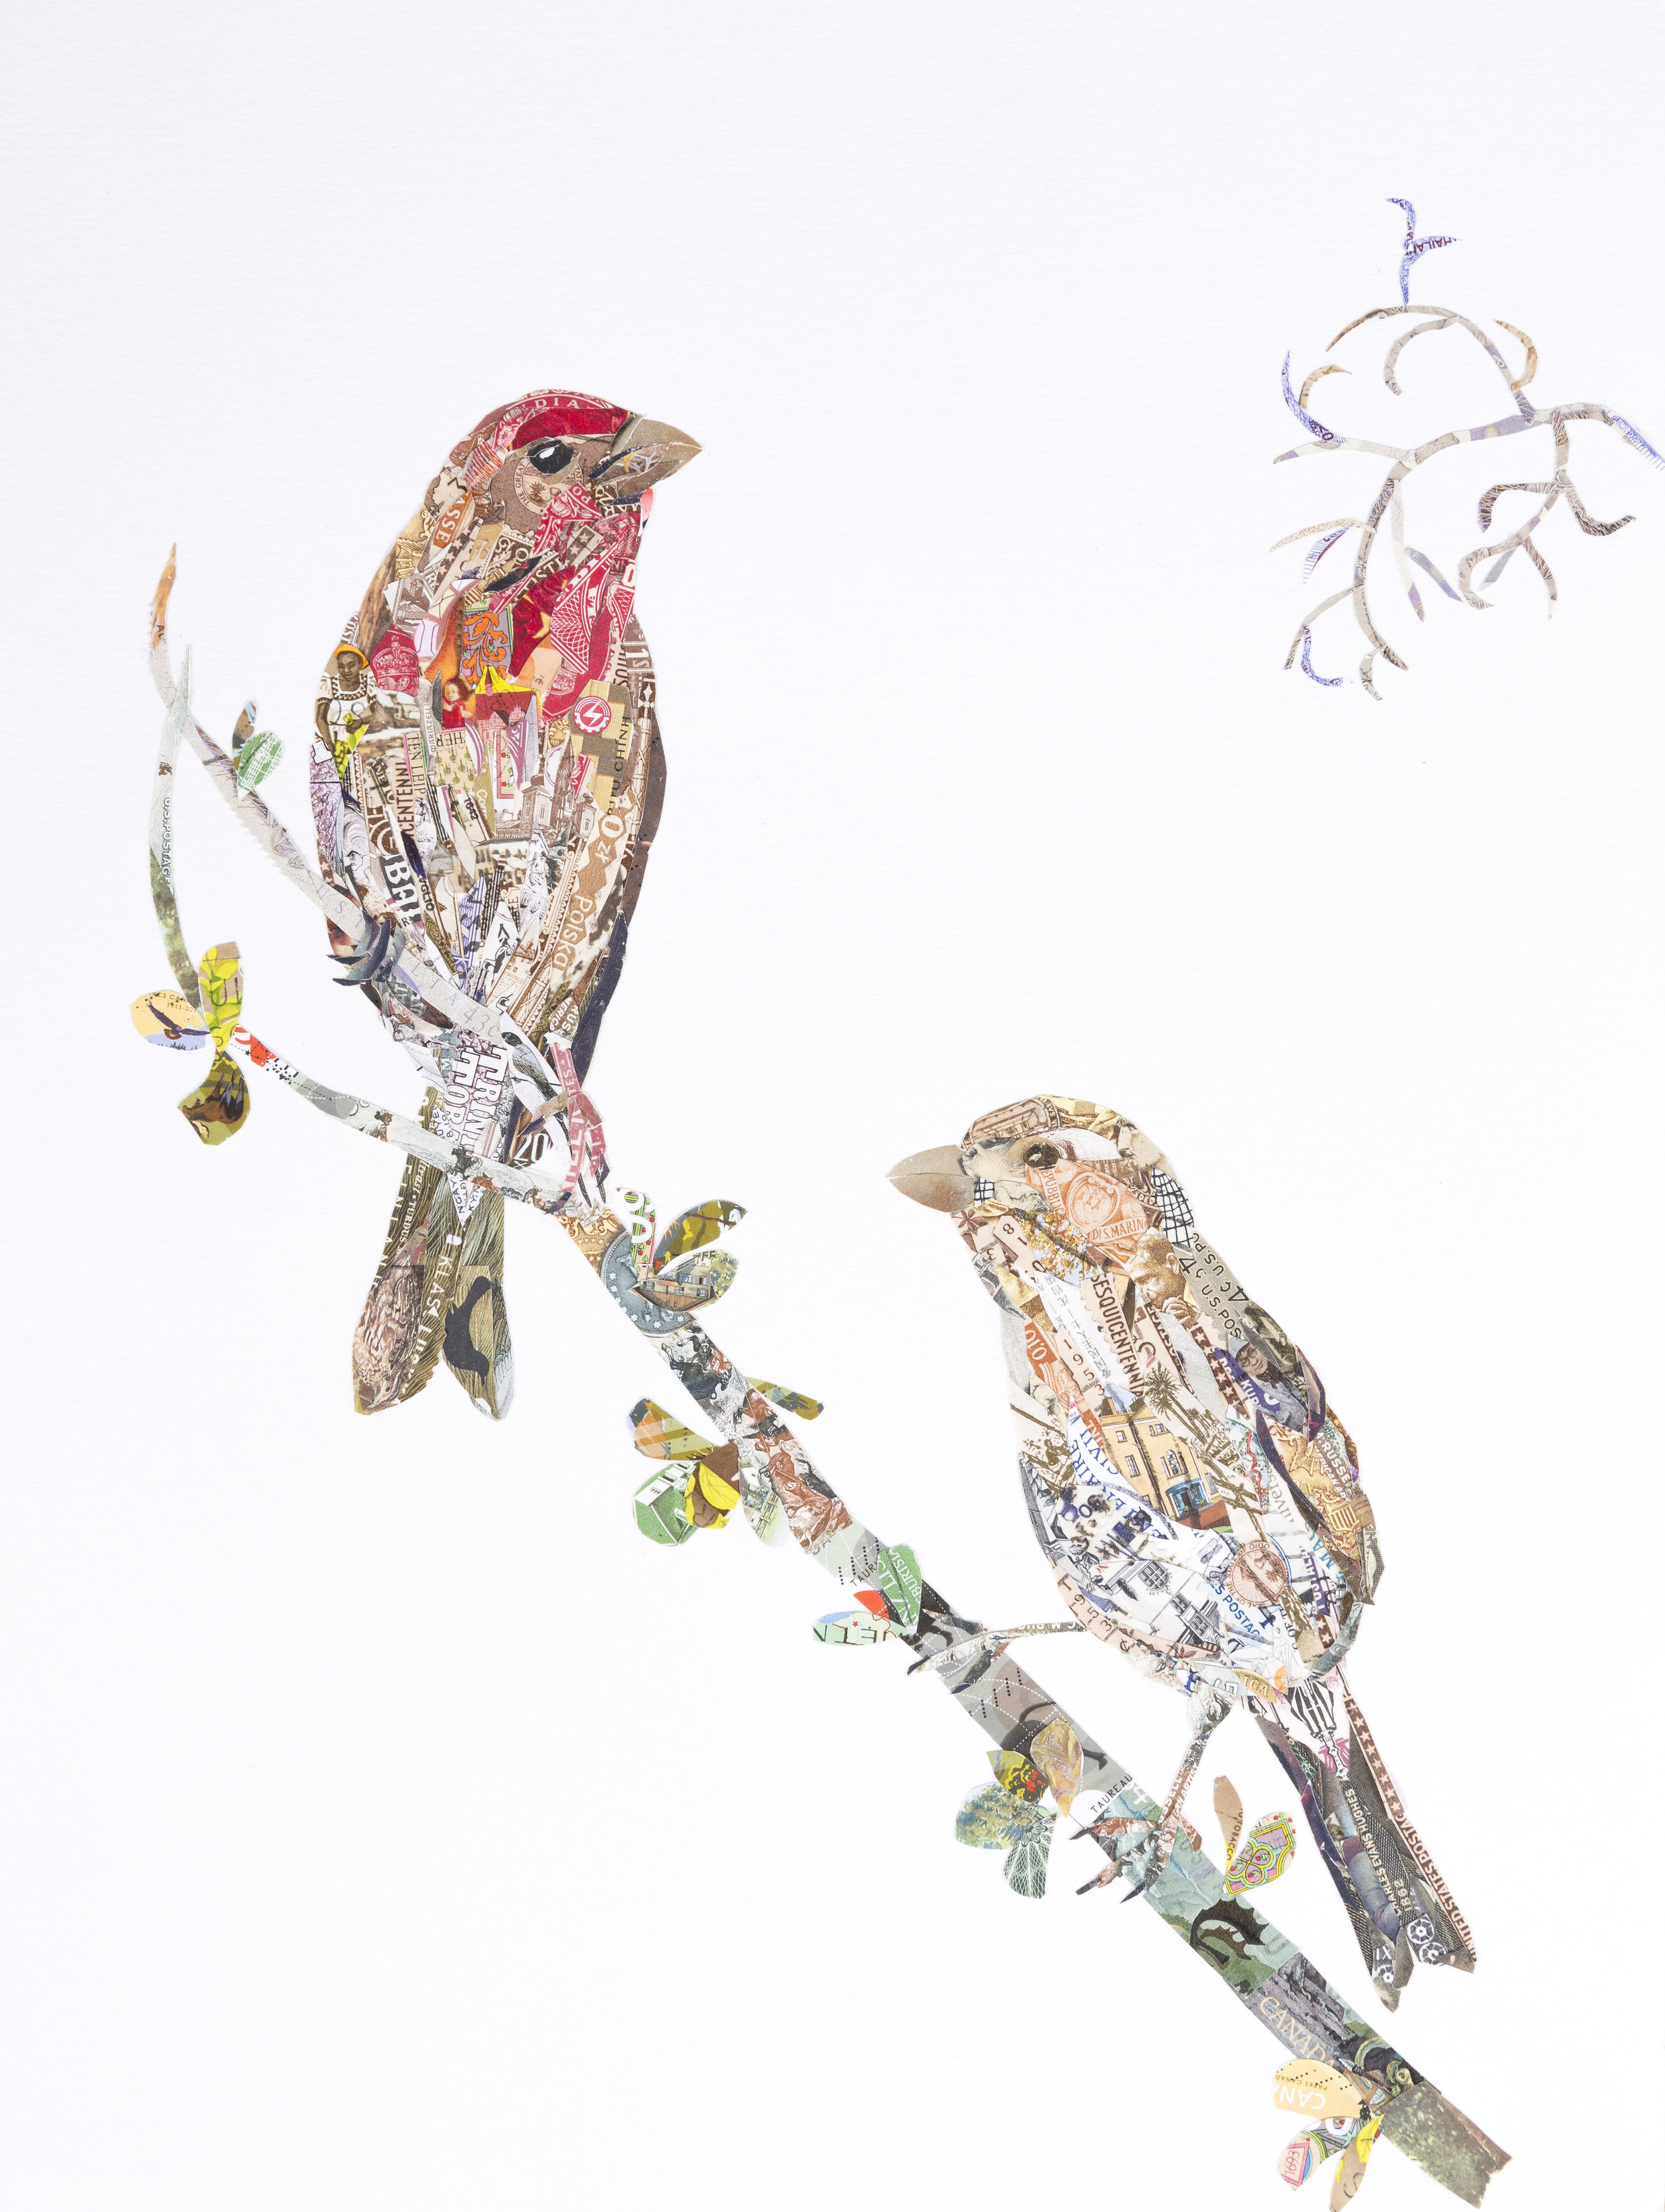 House Finches #2, 2016